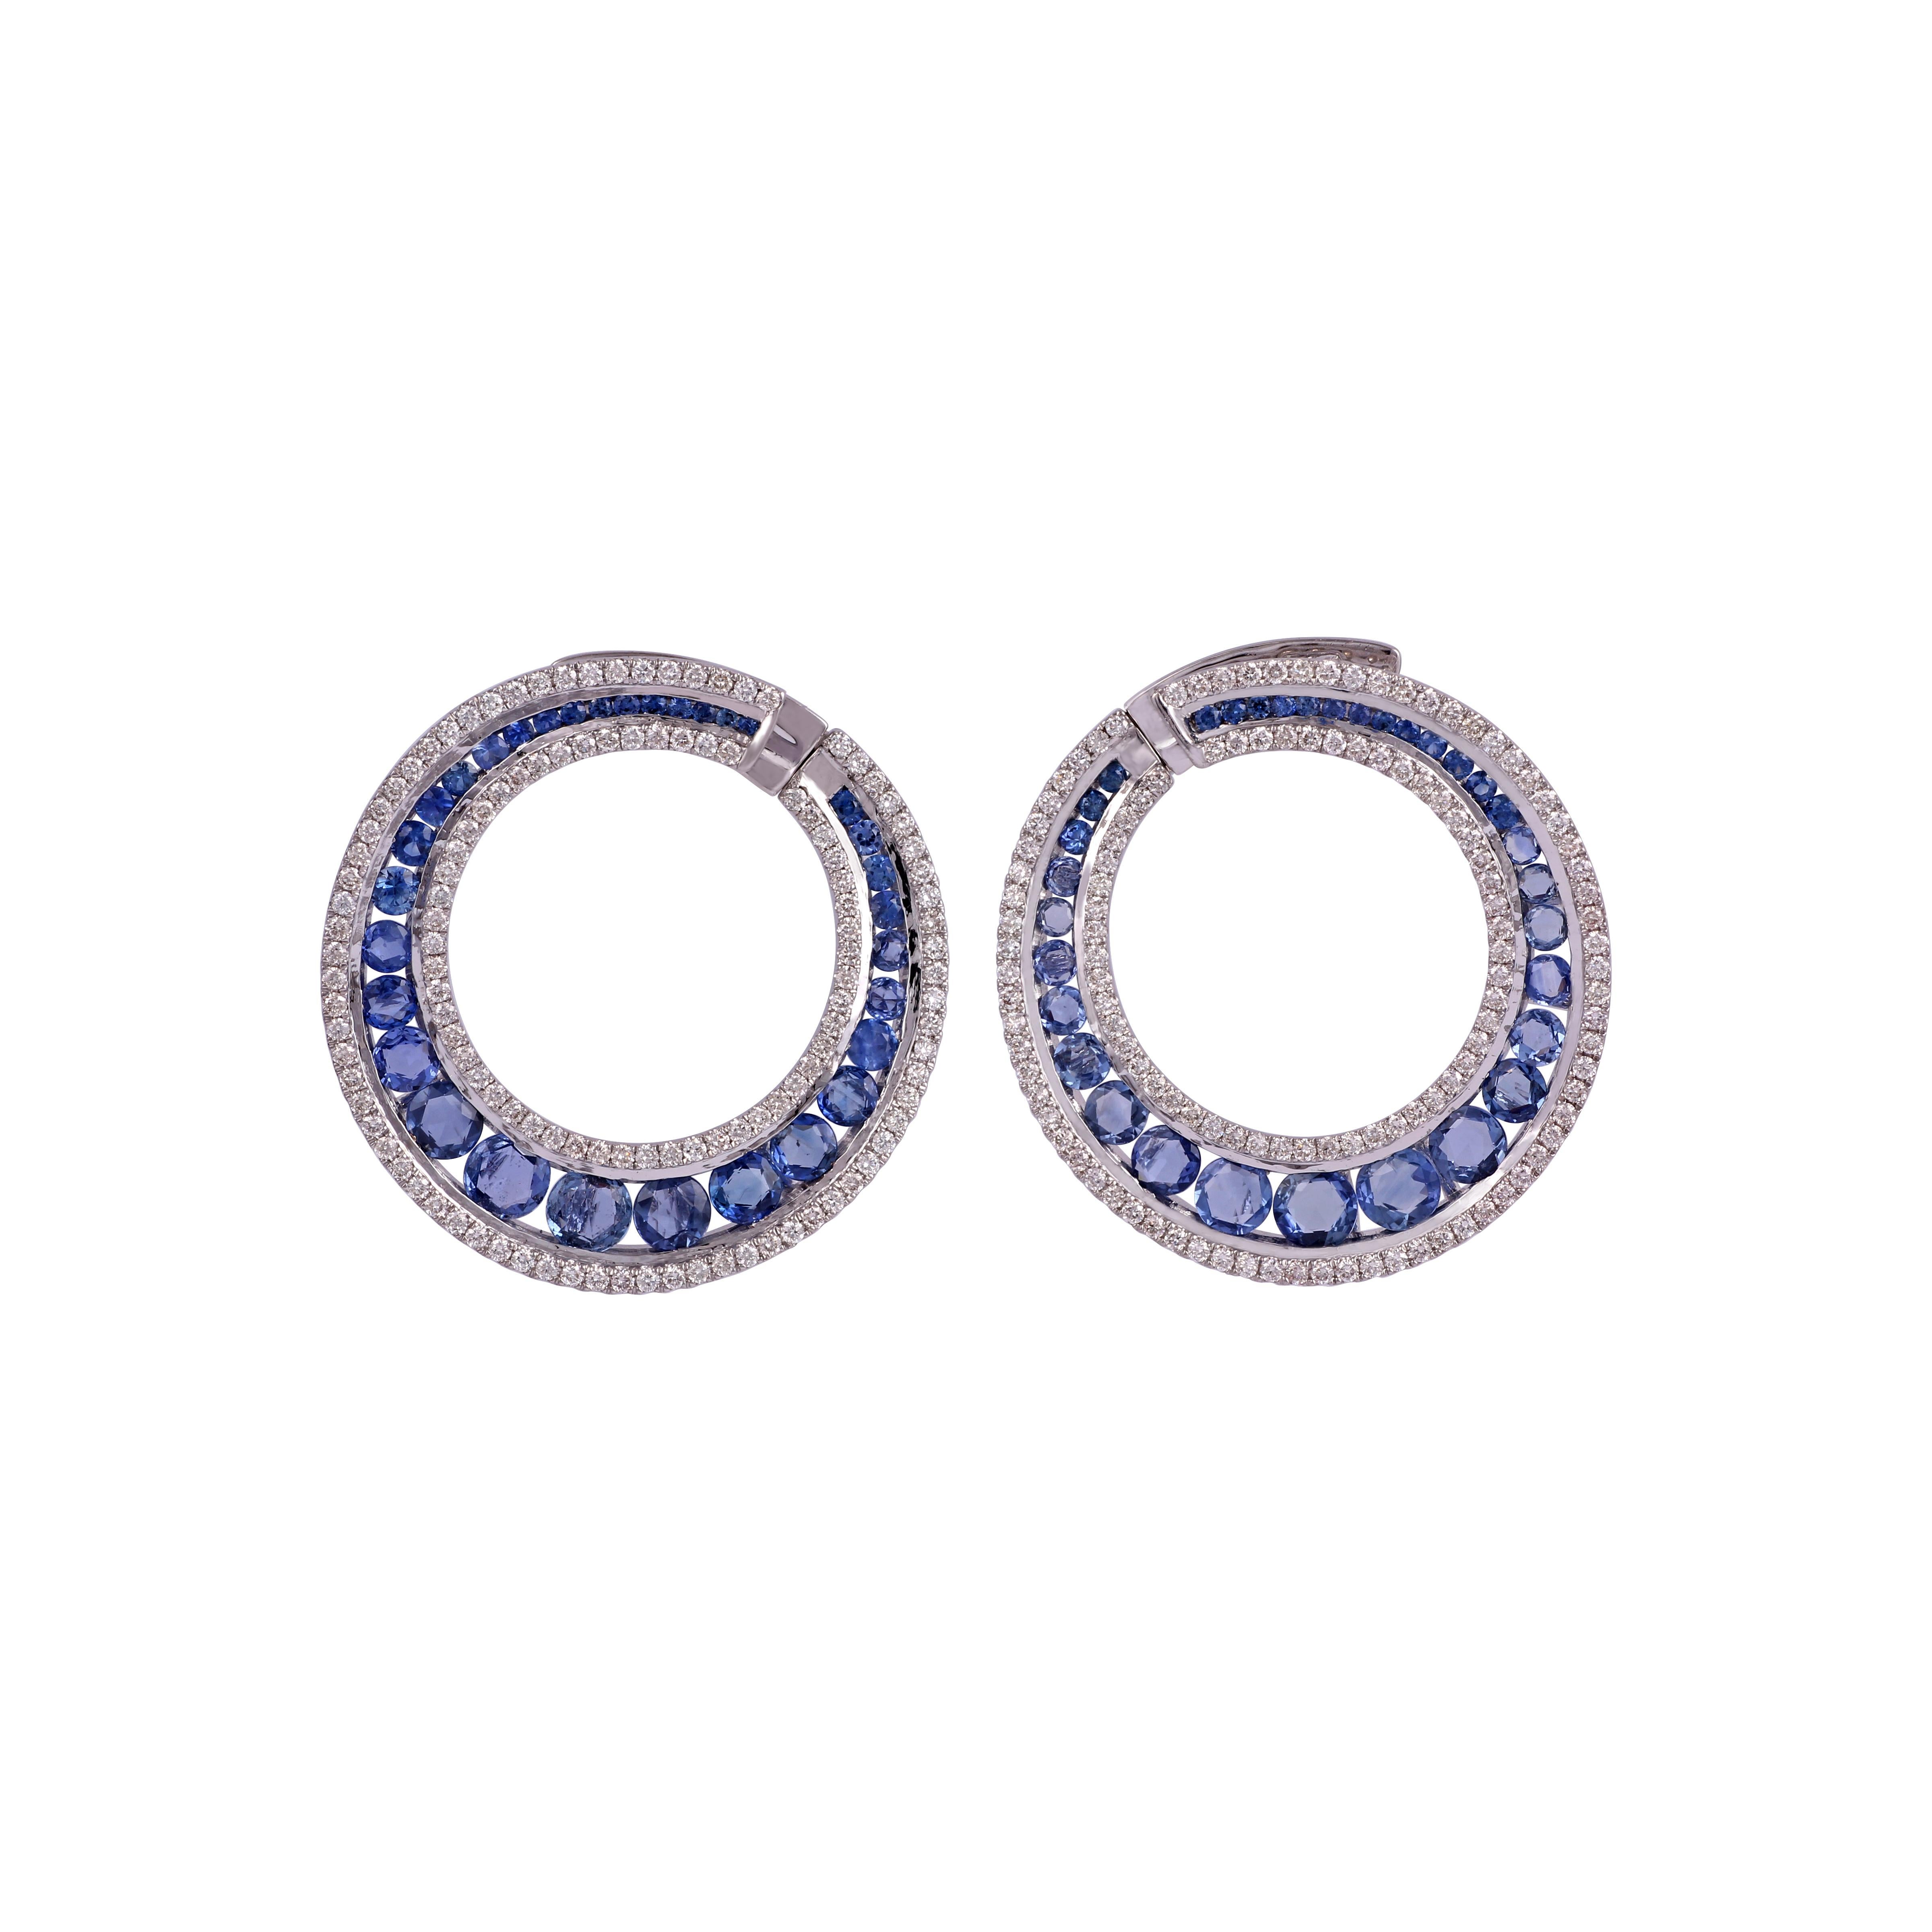 4.76 Carat Clear Blue Sapphire and Diamond Earring in 18 Karat  Gold
  Clear Blue Sapphire -4.76 Carat
Diamond -1.58 Carat
Gold-12.73gm